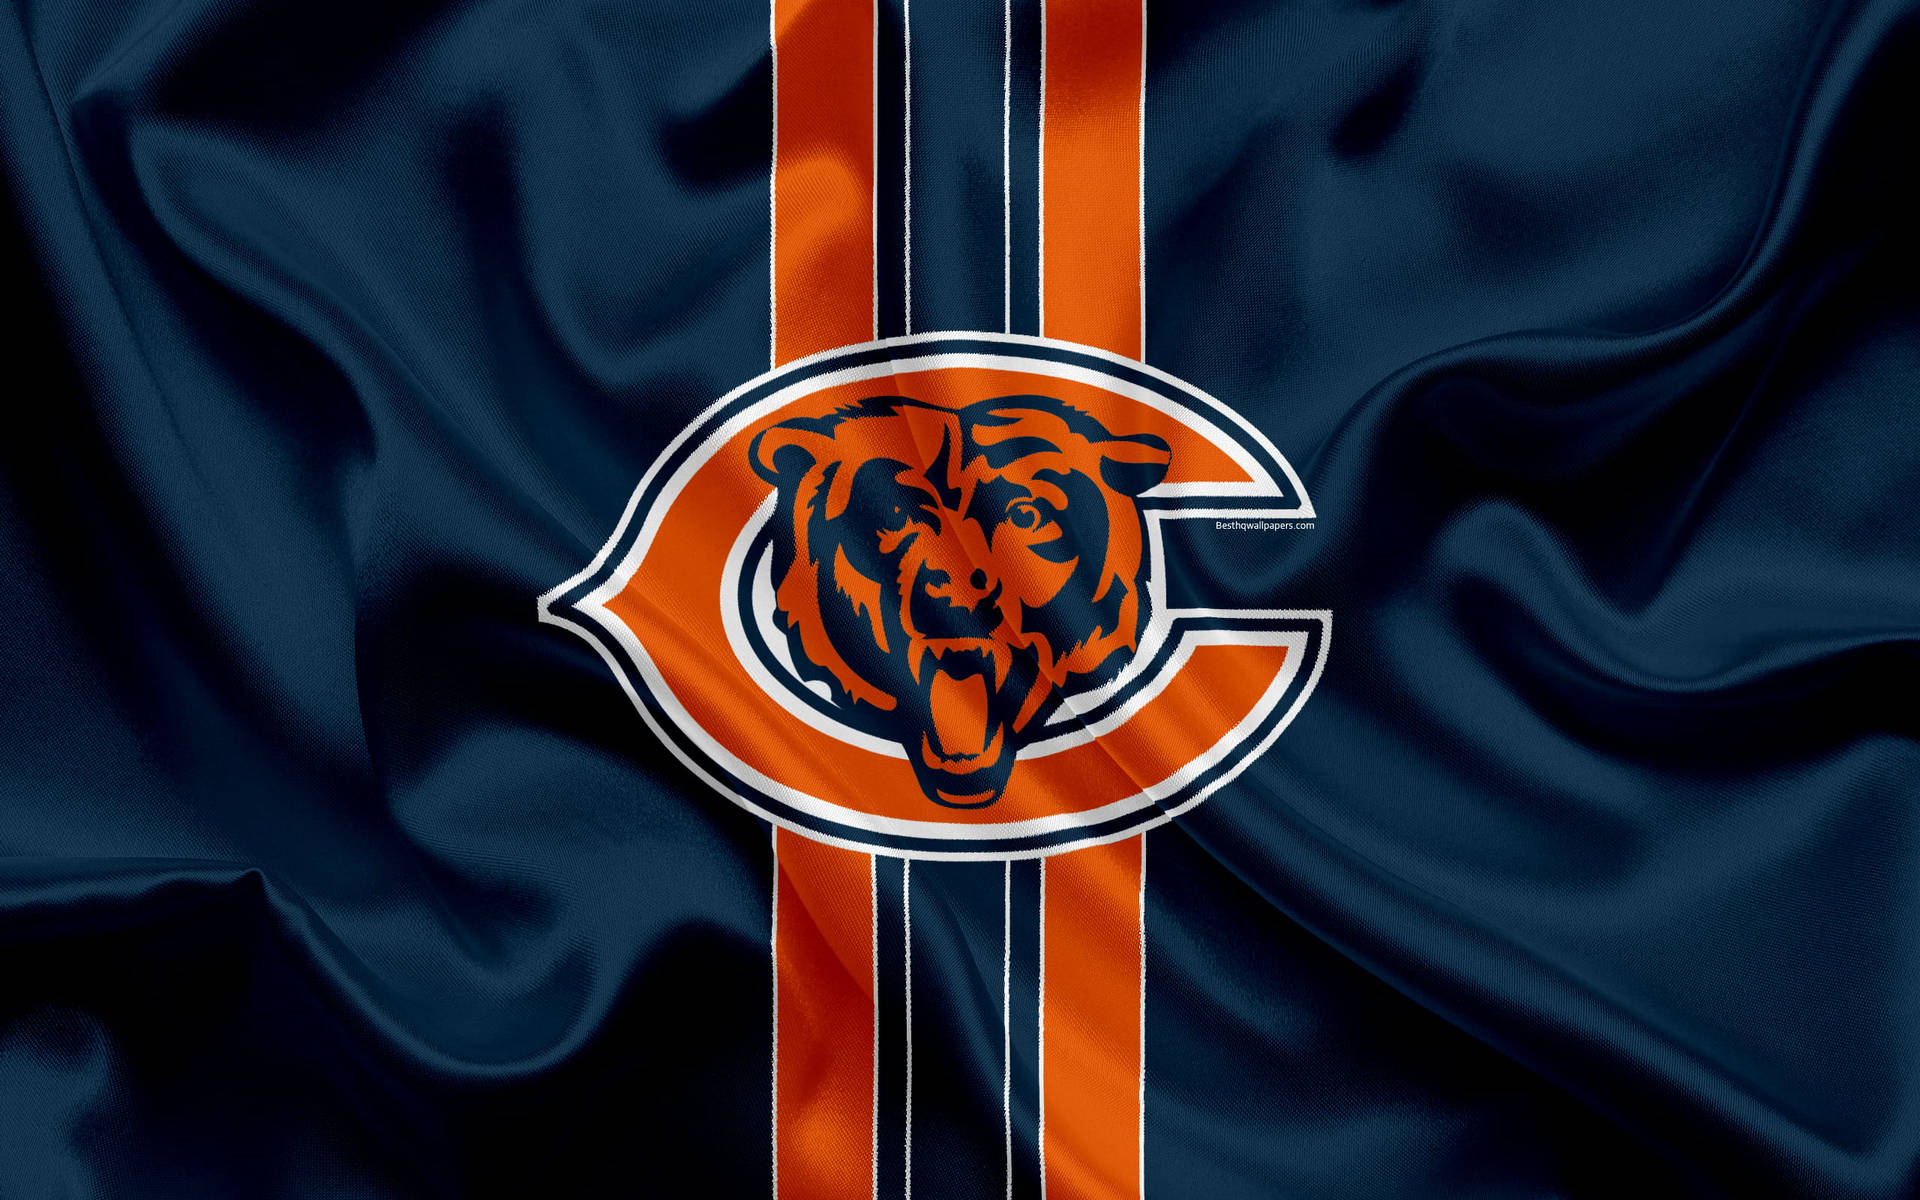 Chicagobears Nfl Iphone - Chicago Bears Nfl Iphone Wallpaper